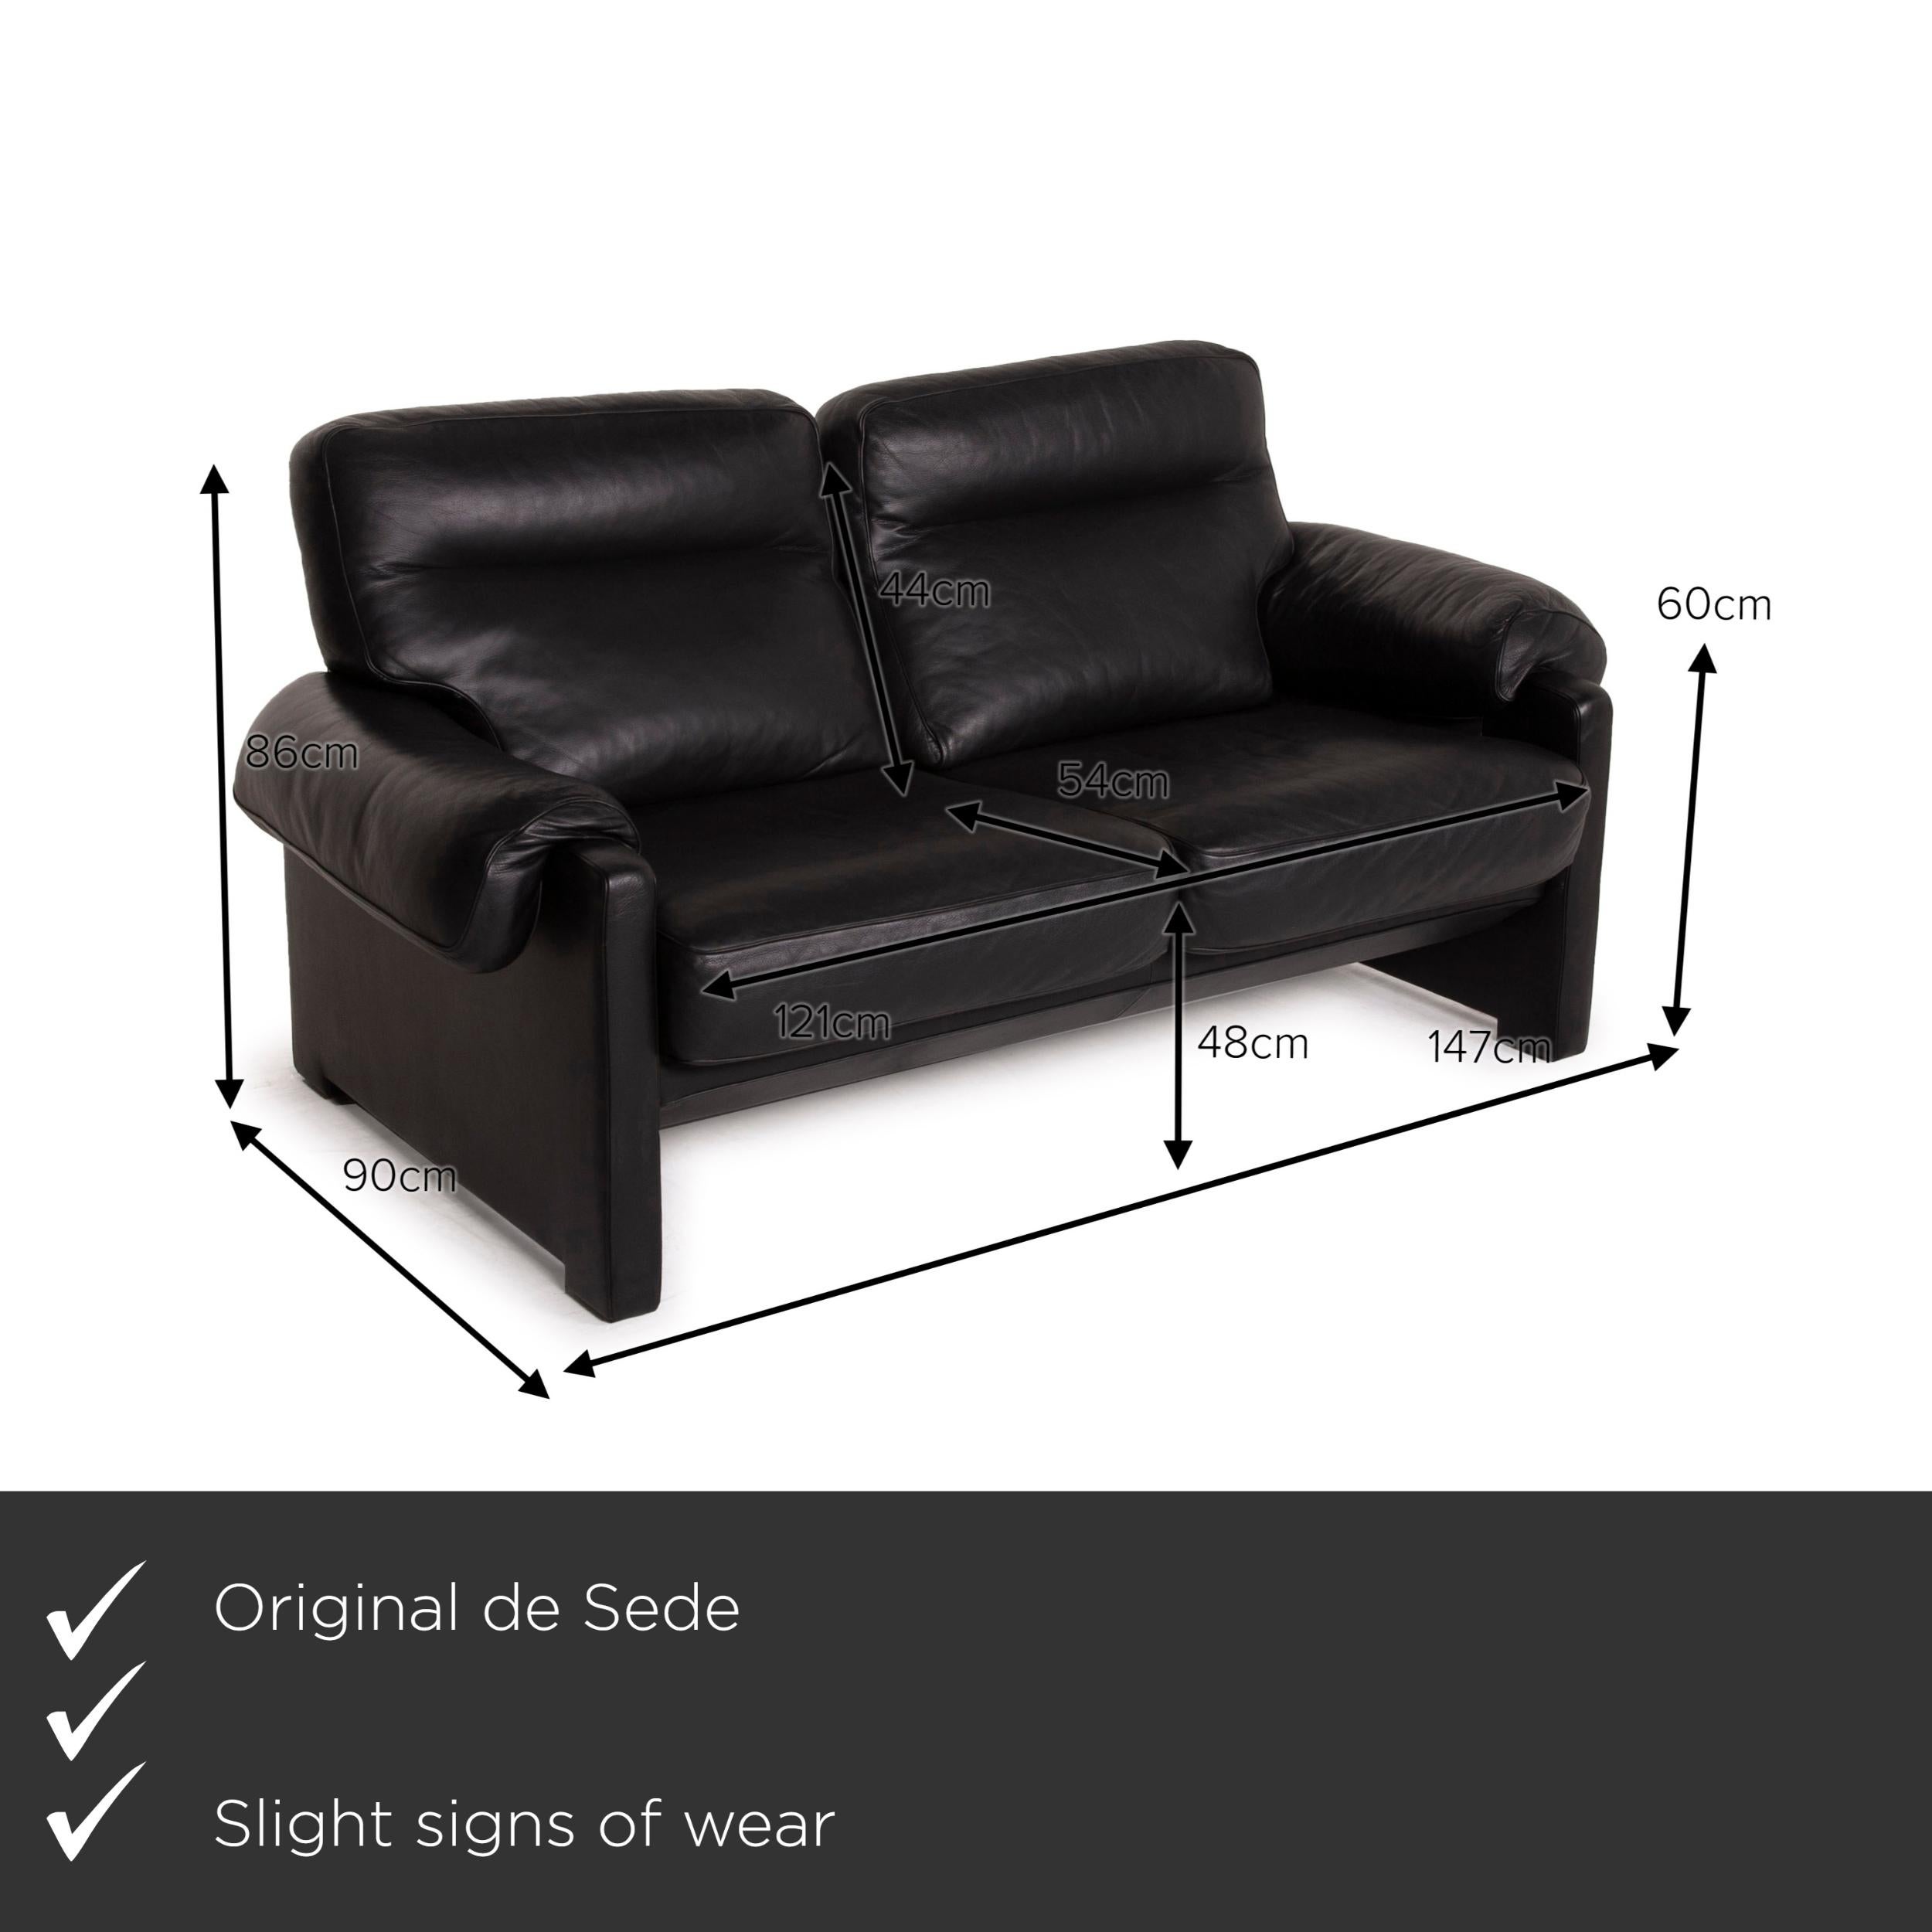 We present to you a De Sede ds 70 leather sofa black two-seater.


 Product measurements in centimeters:
 

Depth 90
Width 147
Height 86
Seat height 48
Rest height 60
Seat depth 54
Seat width 121
Back height 44.
 